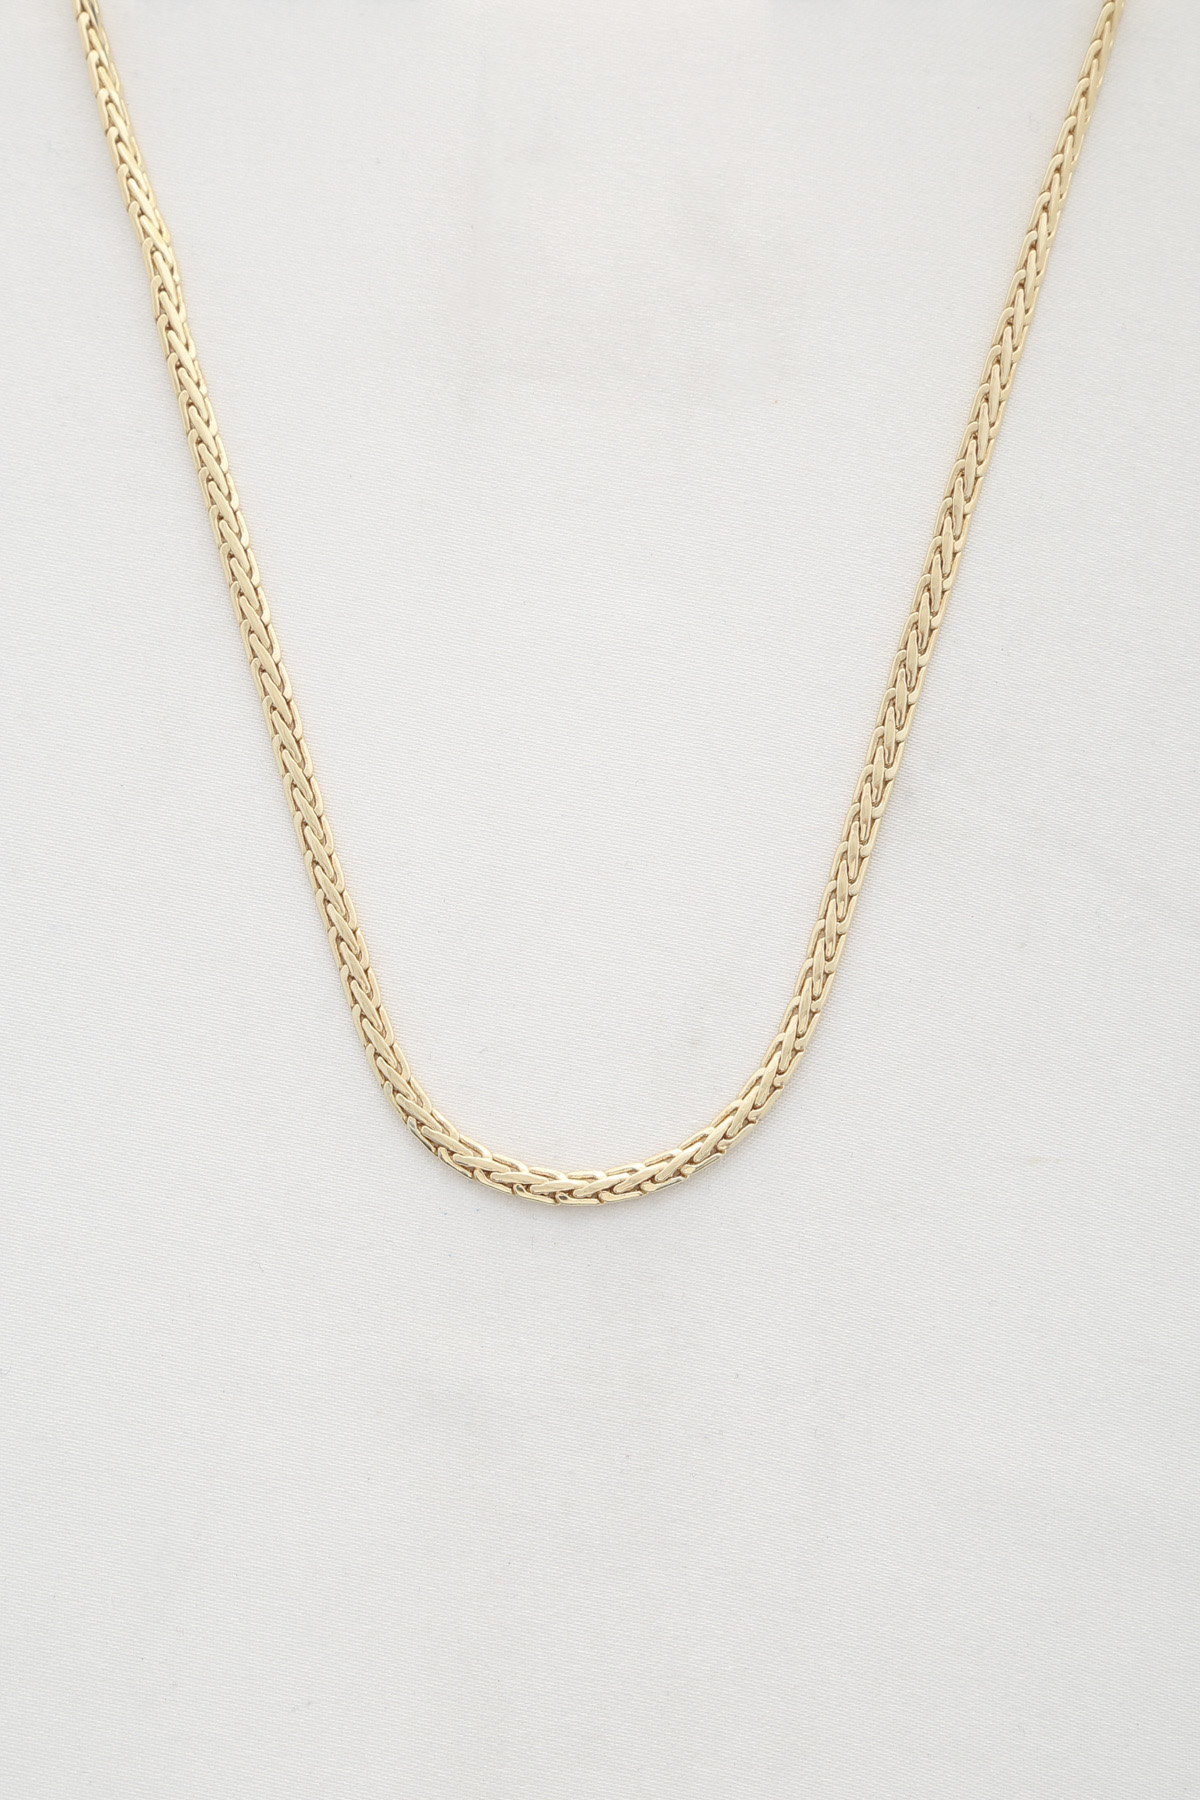 WHEAT LINK METAL NECKLACE